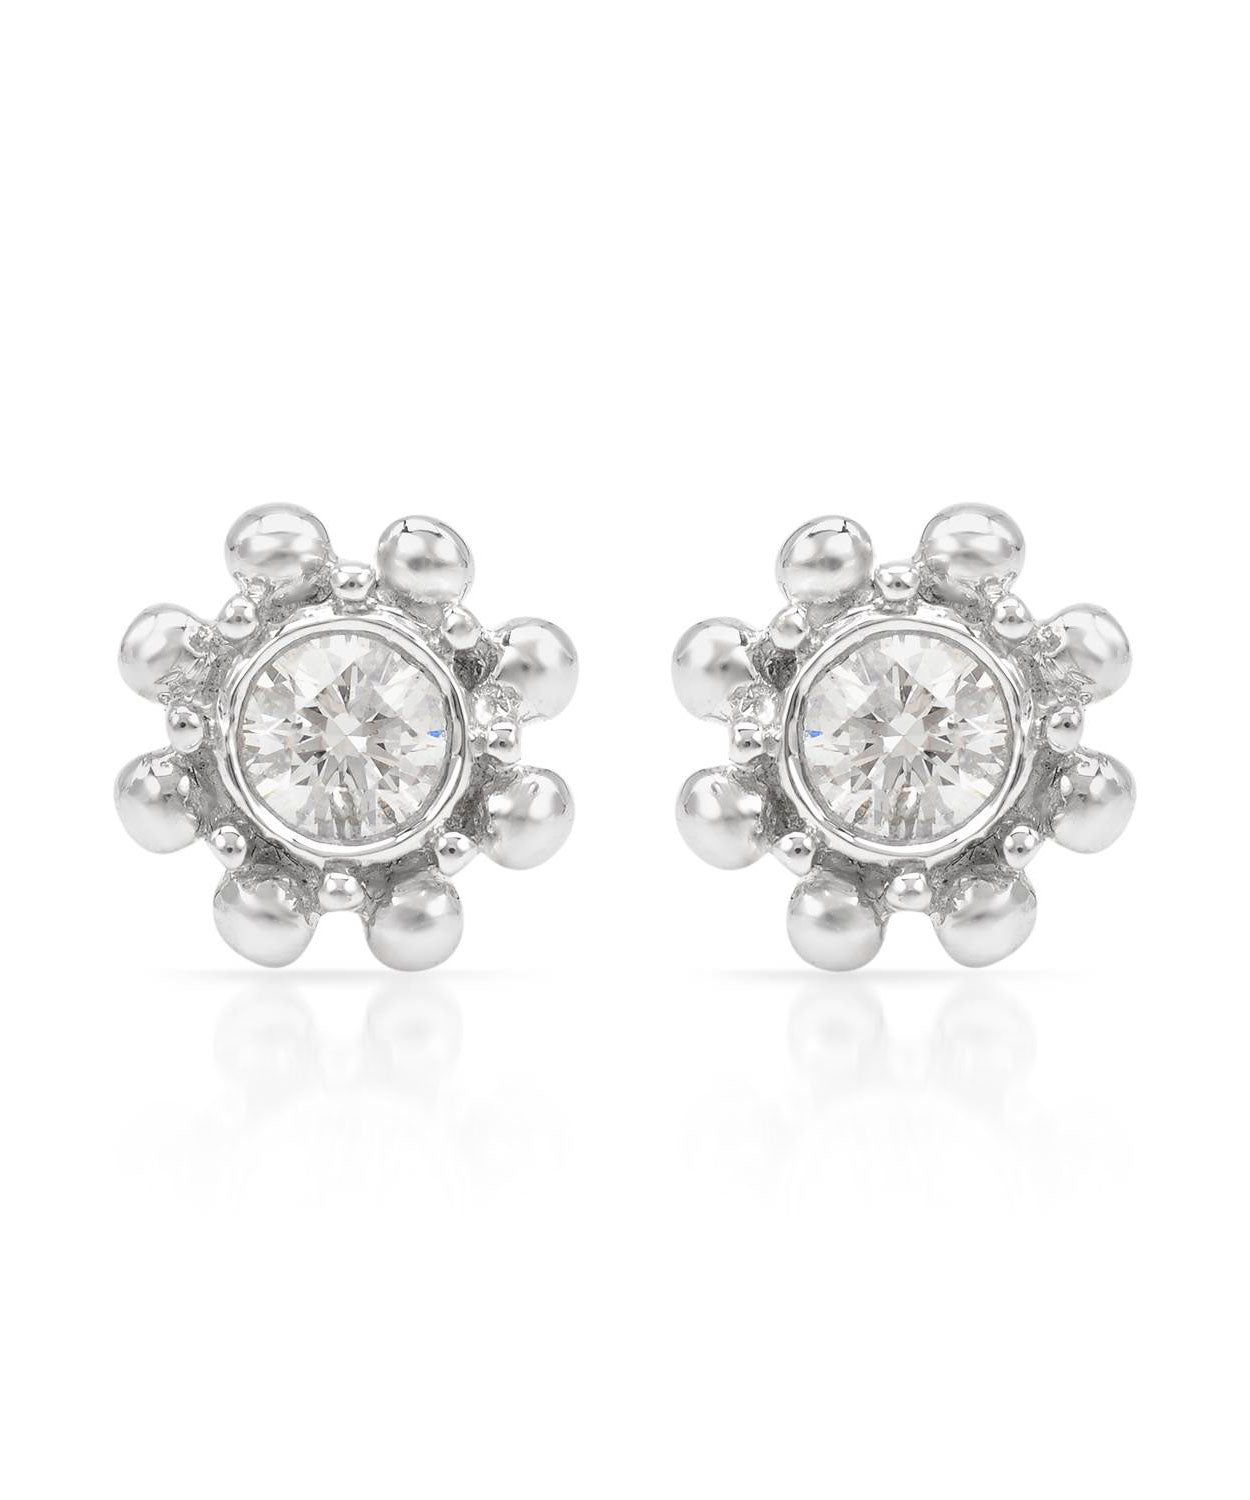 Signature Collection 0.20 ctw Diamond 14k White Gold Dainty Stud Earrings View 1